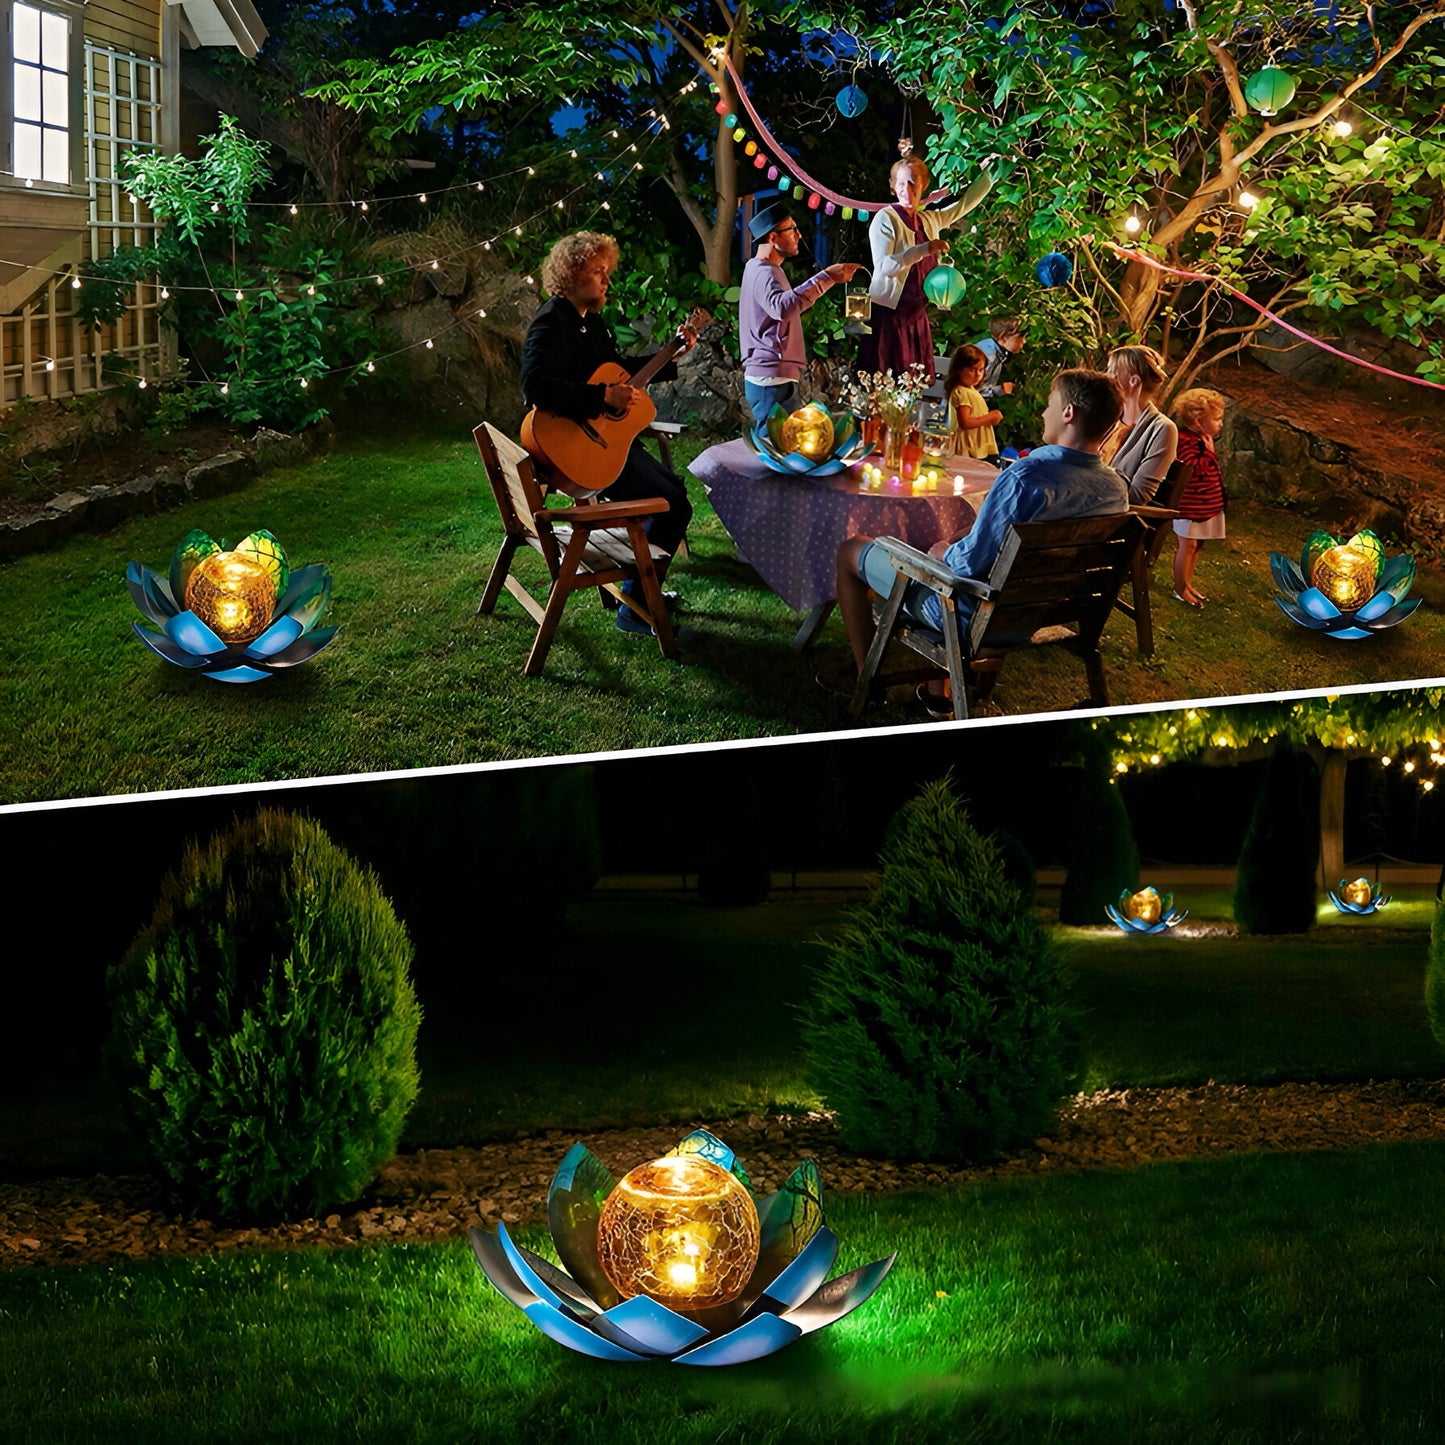 Solar Outdoor Simulation Lotus Lamp, 11.02 x 11.02 x 4.72 Inches, Lawn Decor Landscape Light, Suitable for Garden, Balcony, Yard Decoration, Waterproof, Energy-saving and Bright